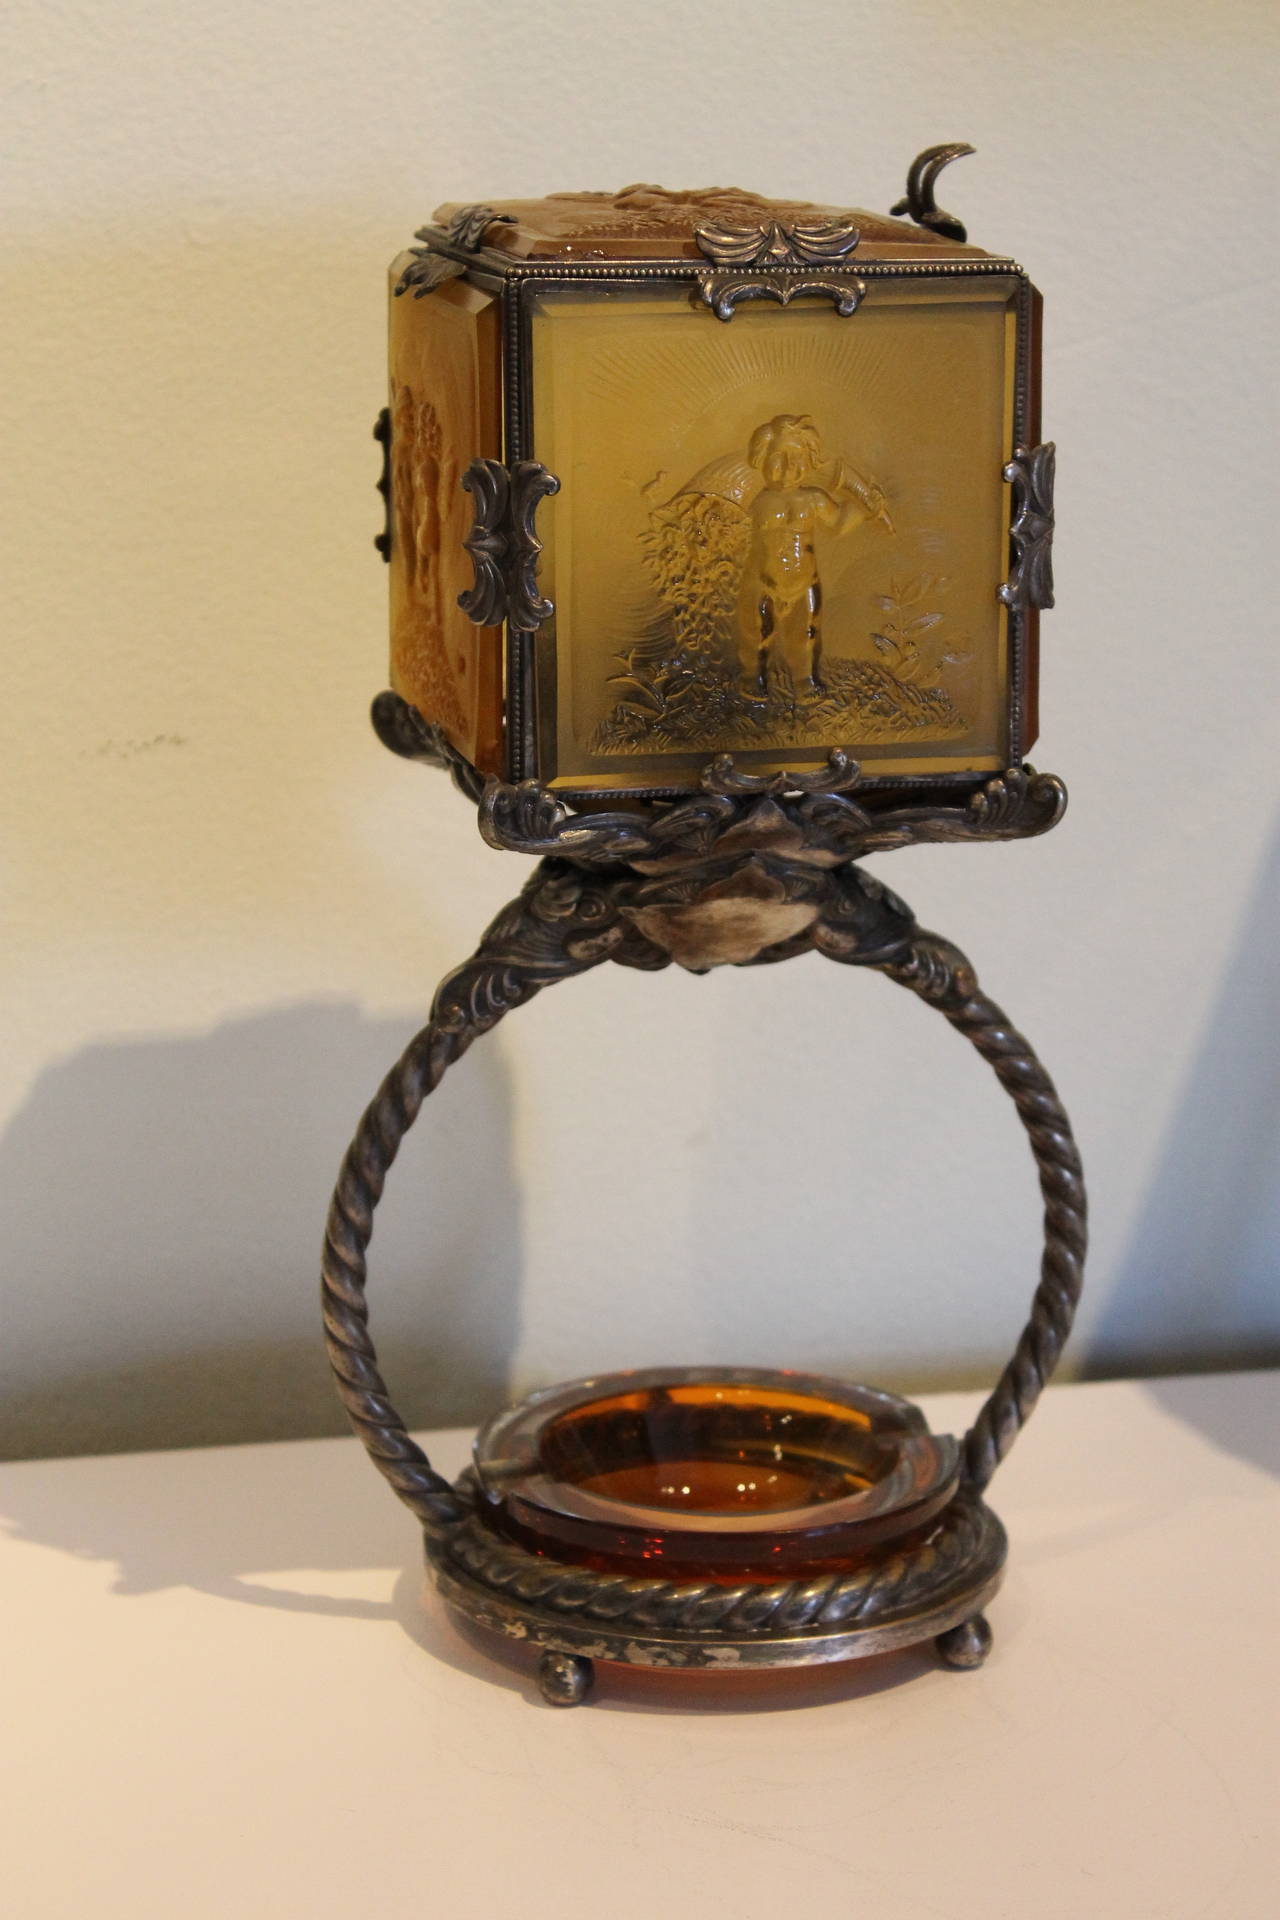 Extremely rare Heinrich Hoffmann Art Nouveau lamp. Quite possibly the only known example, this ultra-scarce circa 1920's lamp features five different bas-relief glass panels depicting winged fairies with birds. The color is a soft amber. The amber